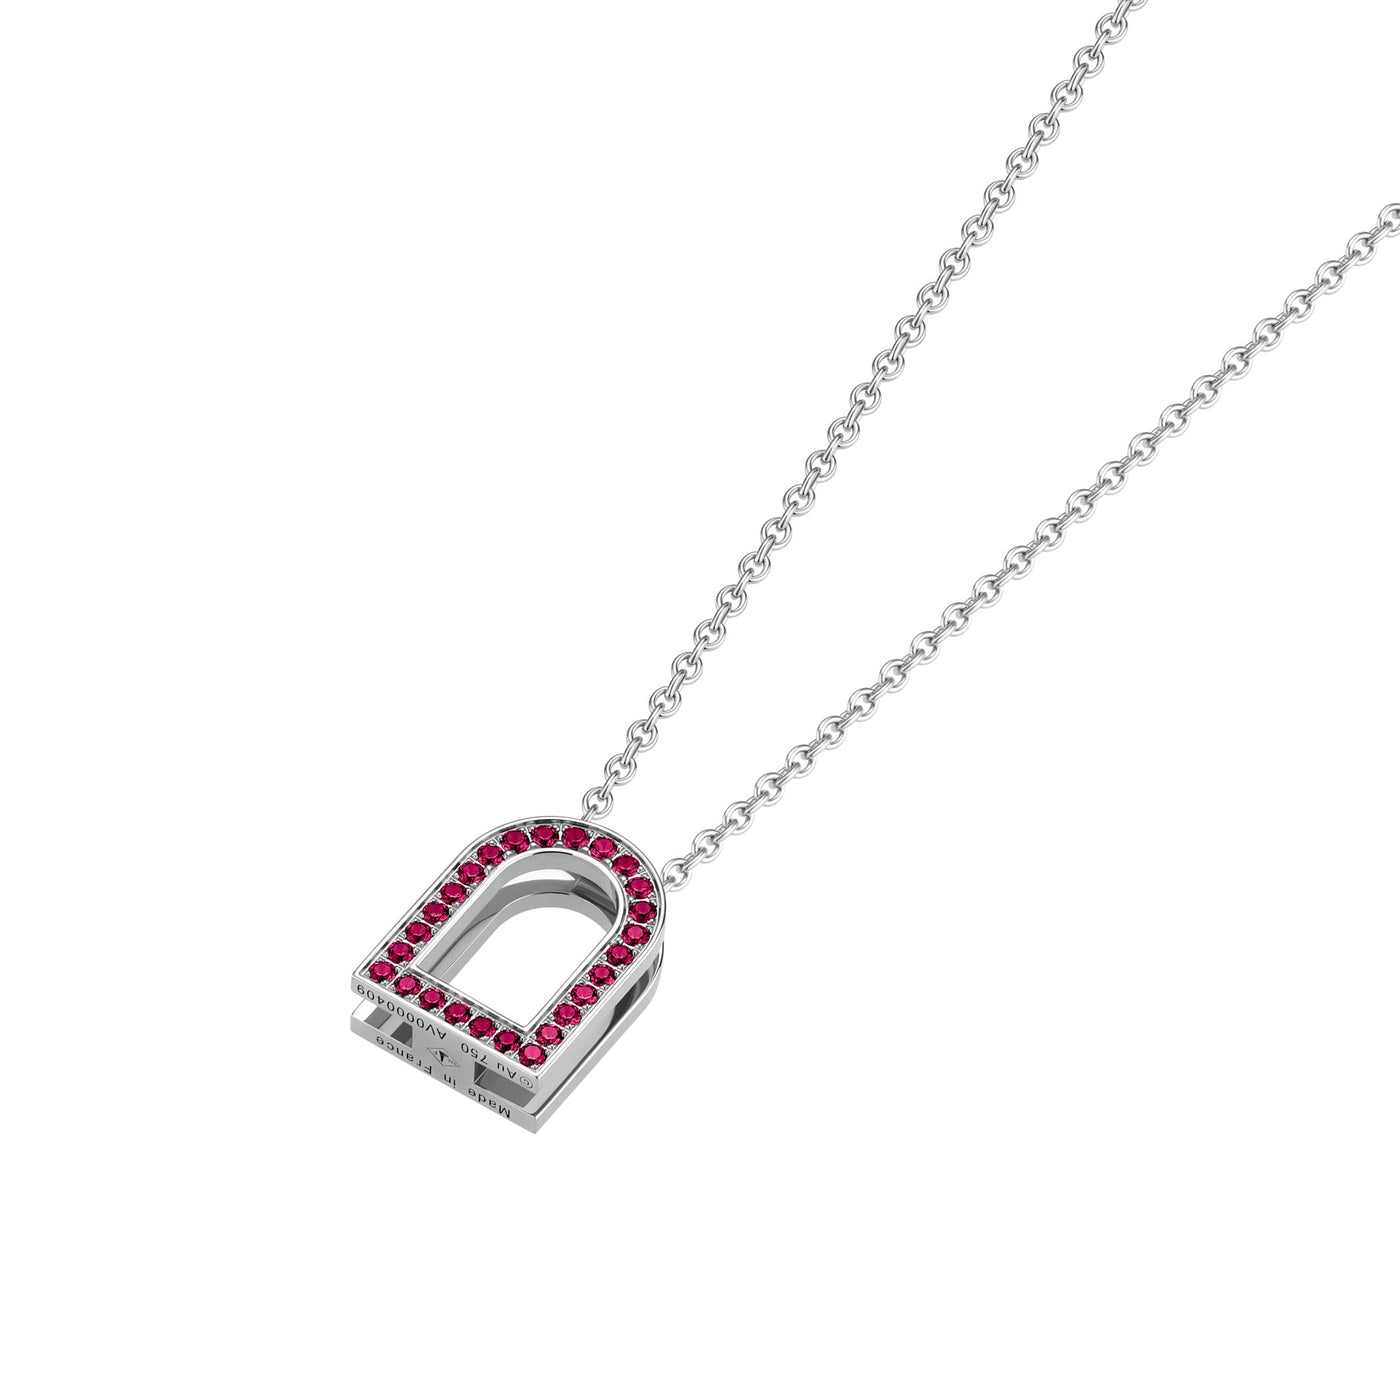 L'Arc Voyage Charm MM, 18k White Gold with Galerie Rubies on Chain Necklace - DAVIDOR